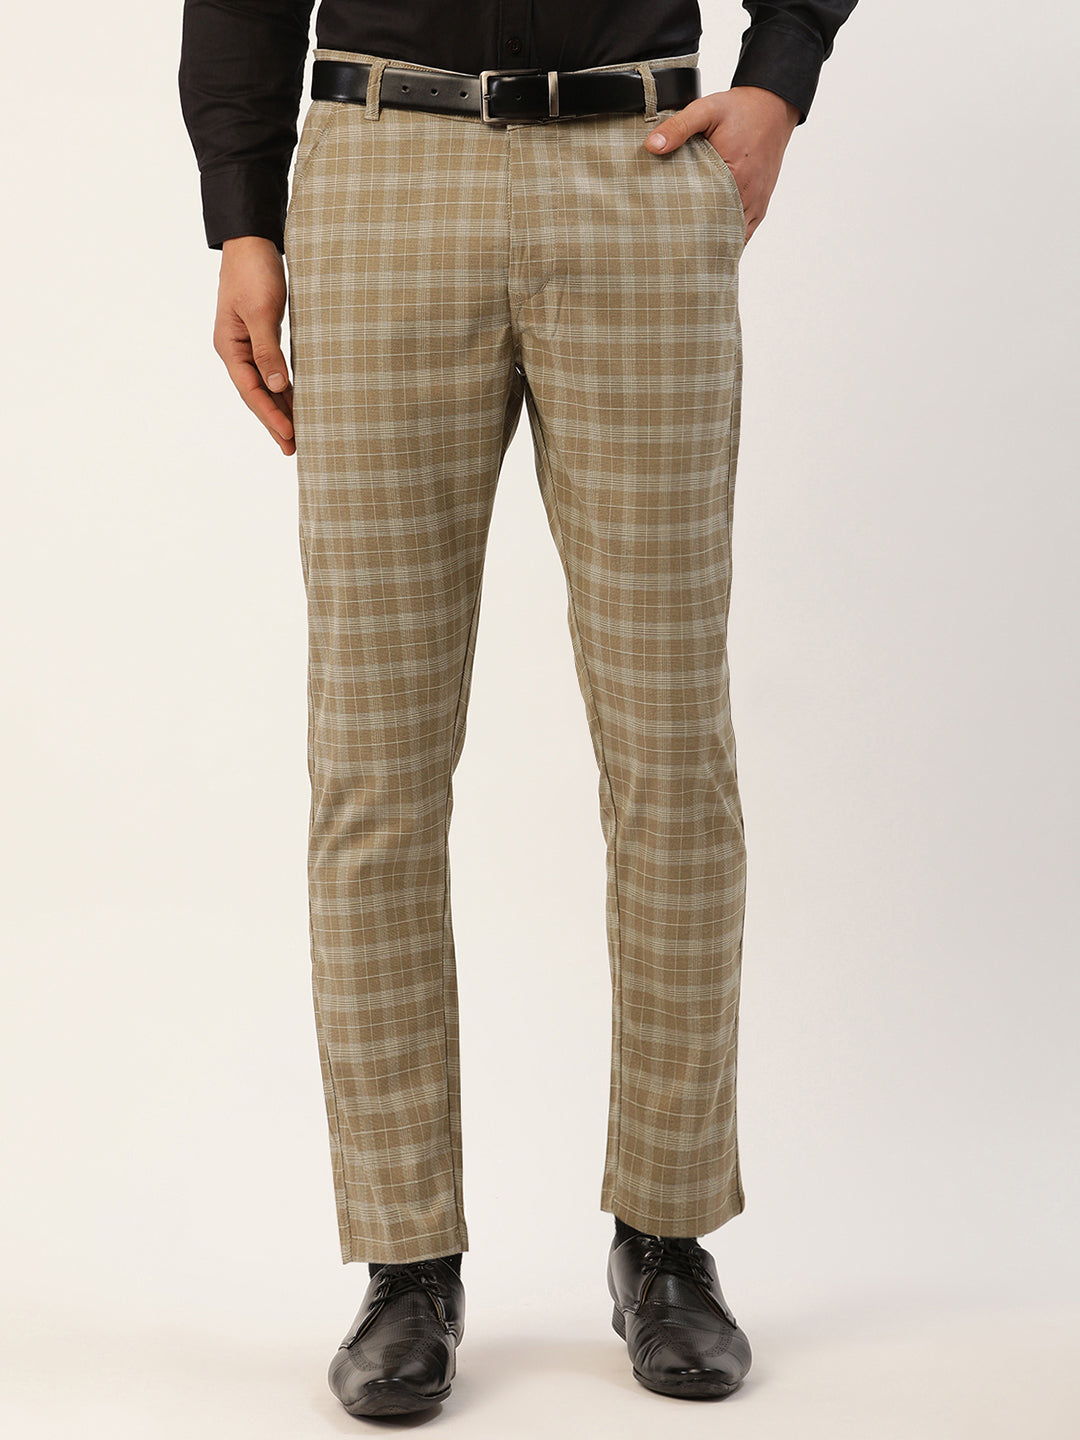 Men's Cotton Blend Pista Green & Yellow Checked Formal Trousers - Sojanya |  Business casual men, Checked trousers, White collared shirt